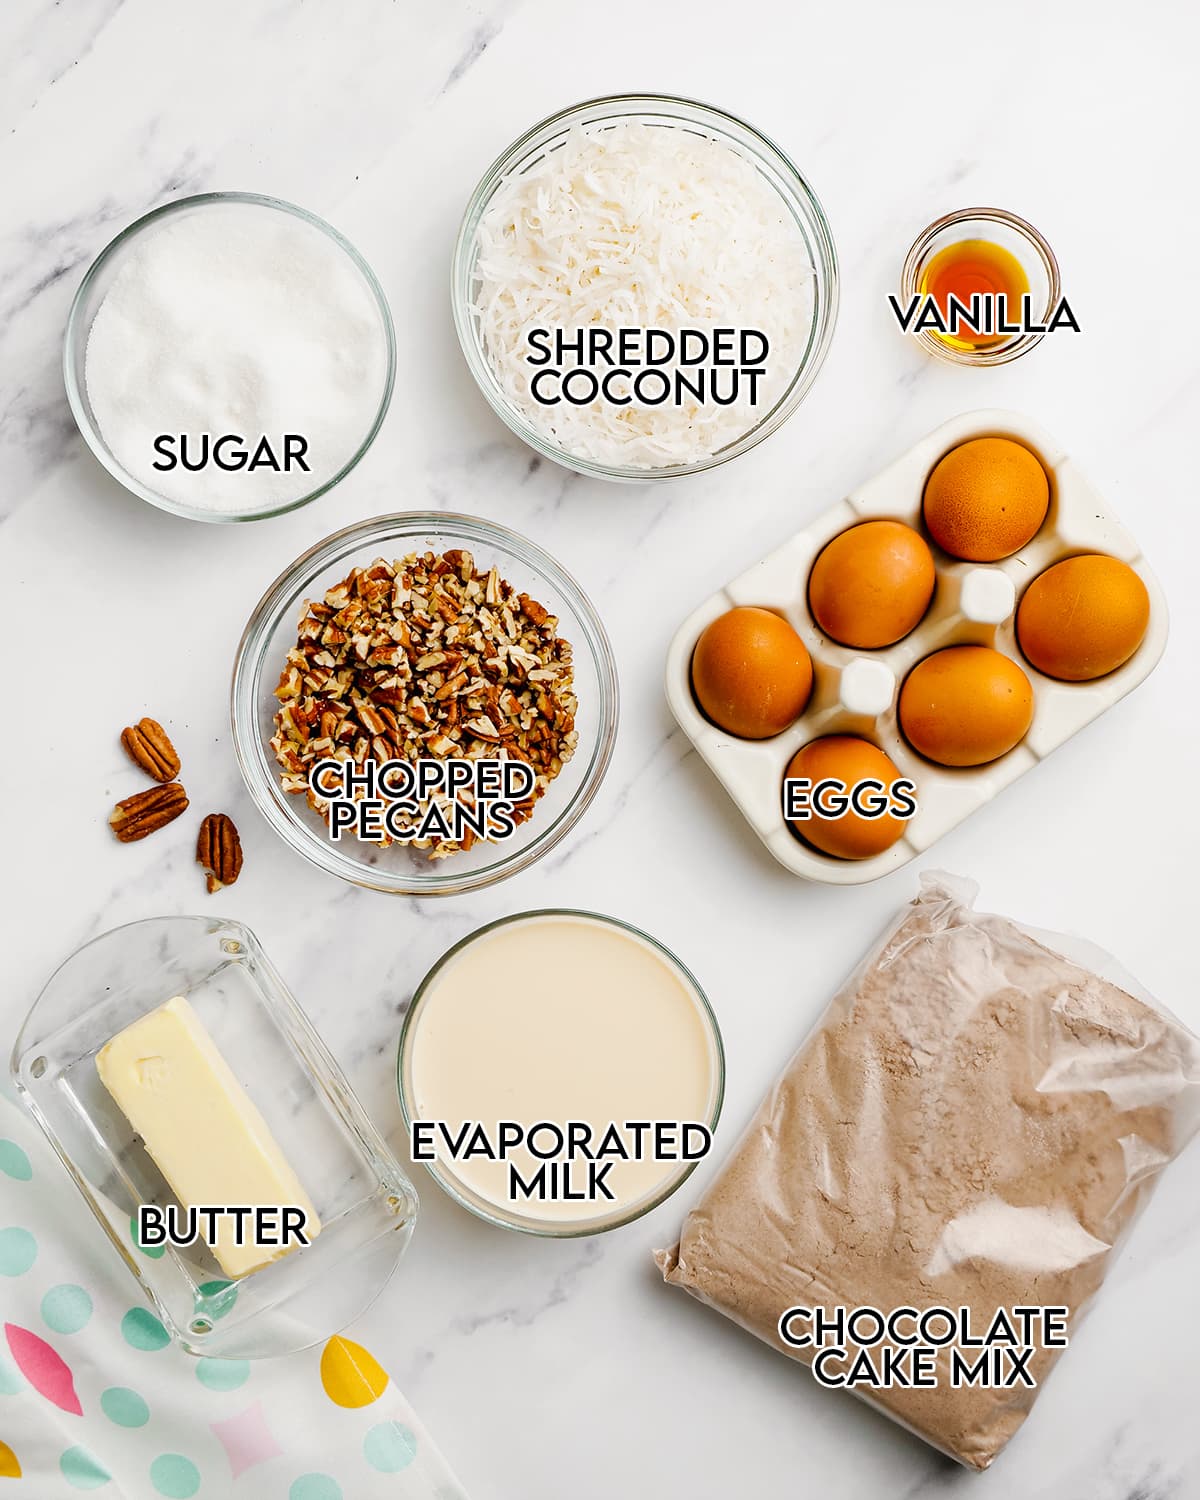 An overhead photo showing the ingredients needed to make German chocolate cake cookies